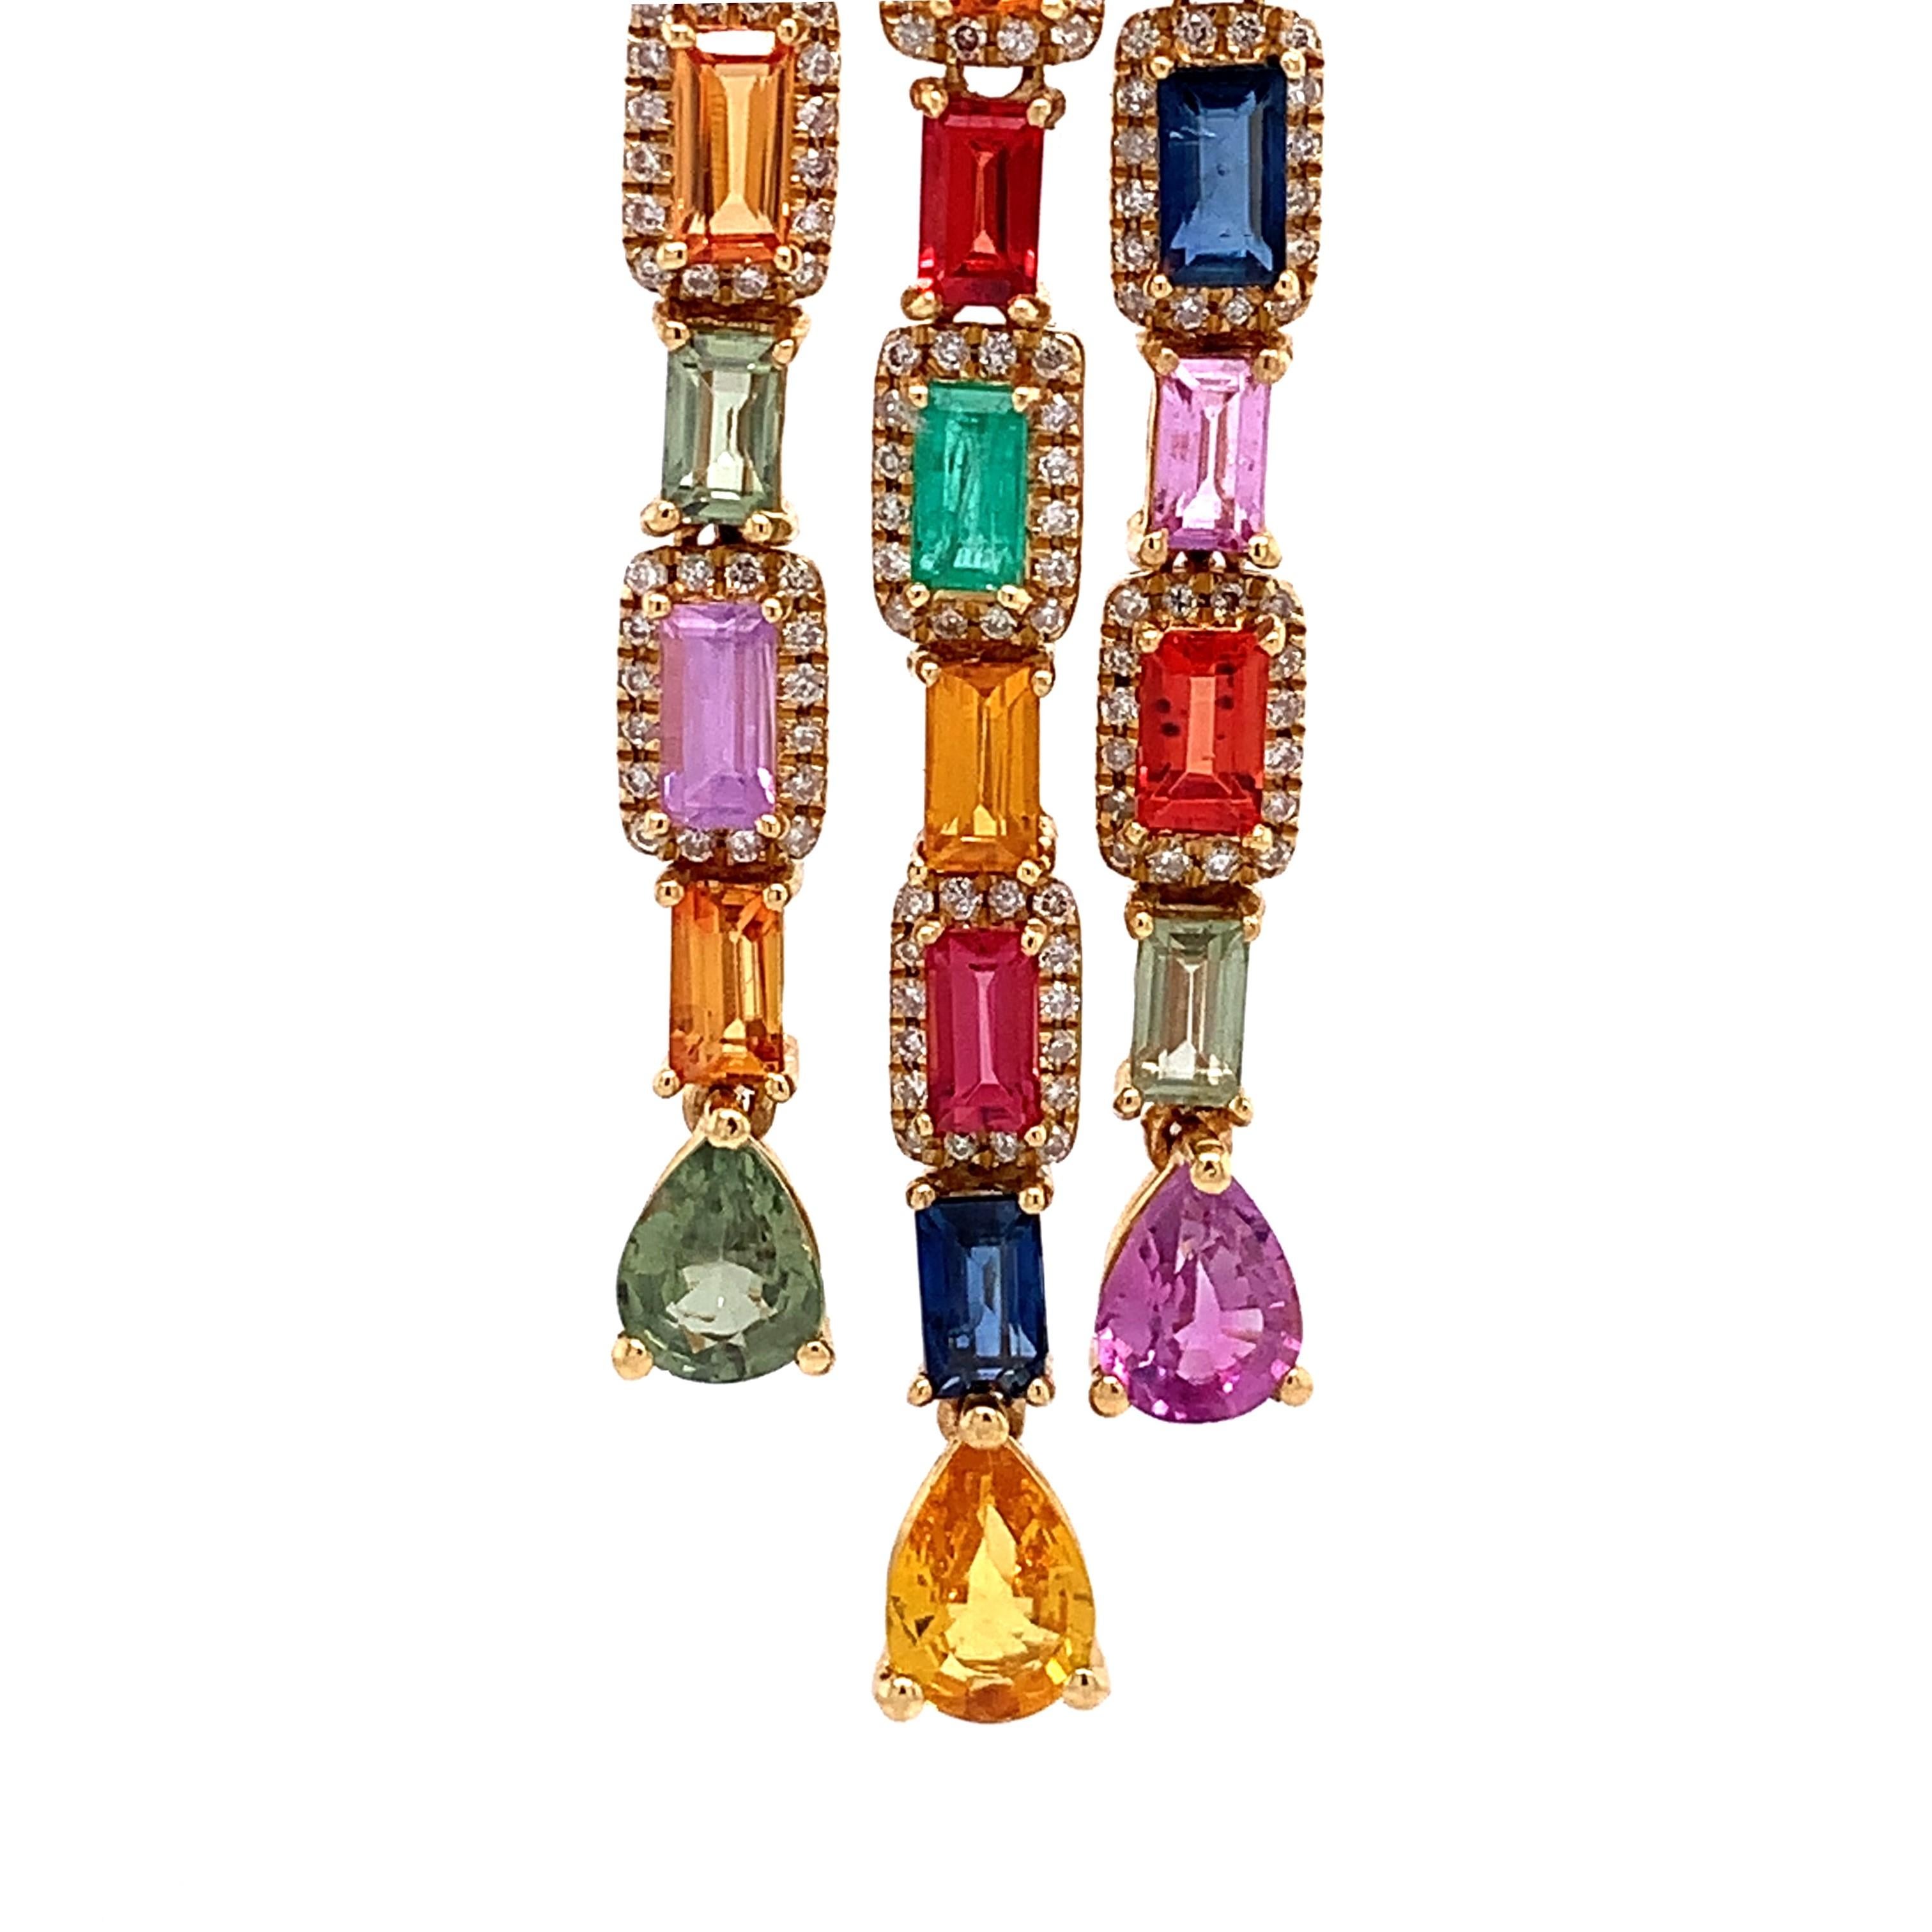 Rainbow Collection

The chromatic intensity of multi-colored Sapphires totaling 13.19 carats accented by sparkling Diamonds in a captivating 3-row dangle design set in Yellow Gold